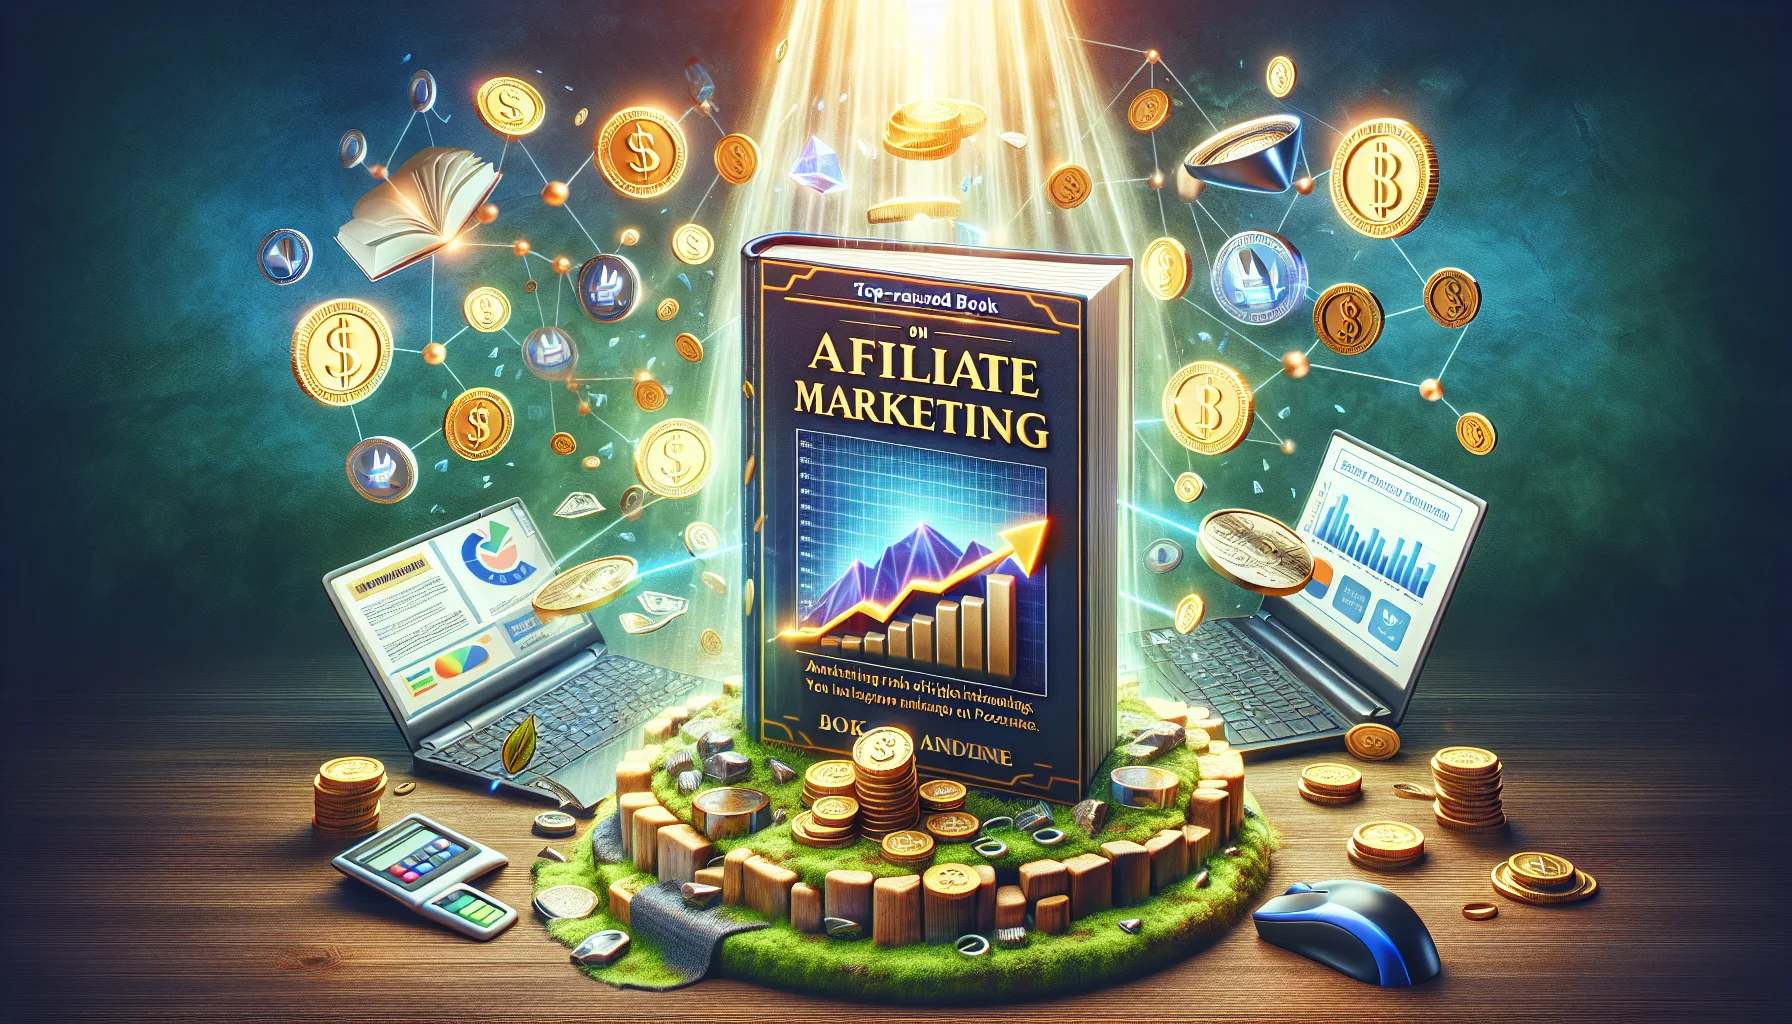 Generate an amusing and realistic image of a top-rated book on affiliate marketing. The book should be dramatically lit, surrounded by visual symbols of online success. Include images such as a laptop displaying increasing profit graphs, virtual coins, and a mouse clicking on a 'buy now' button. The background should be various hues of green to represent financial prosperity and the ambiance should be positive and encouraging. The scene leads onlookers to understand the promise of earning potential through online marketing.